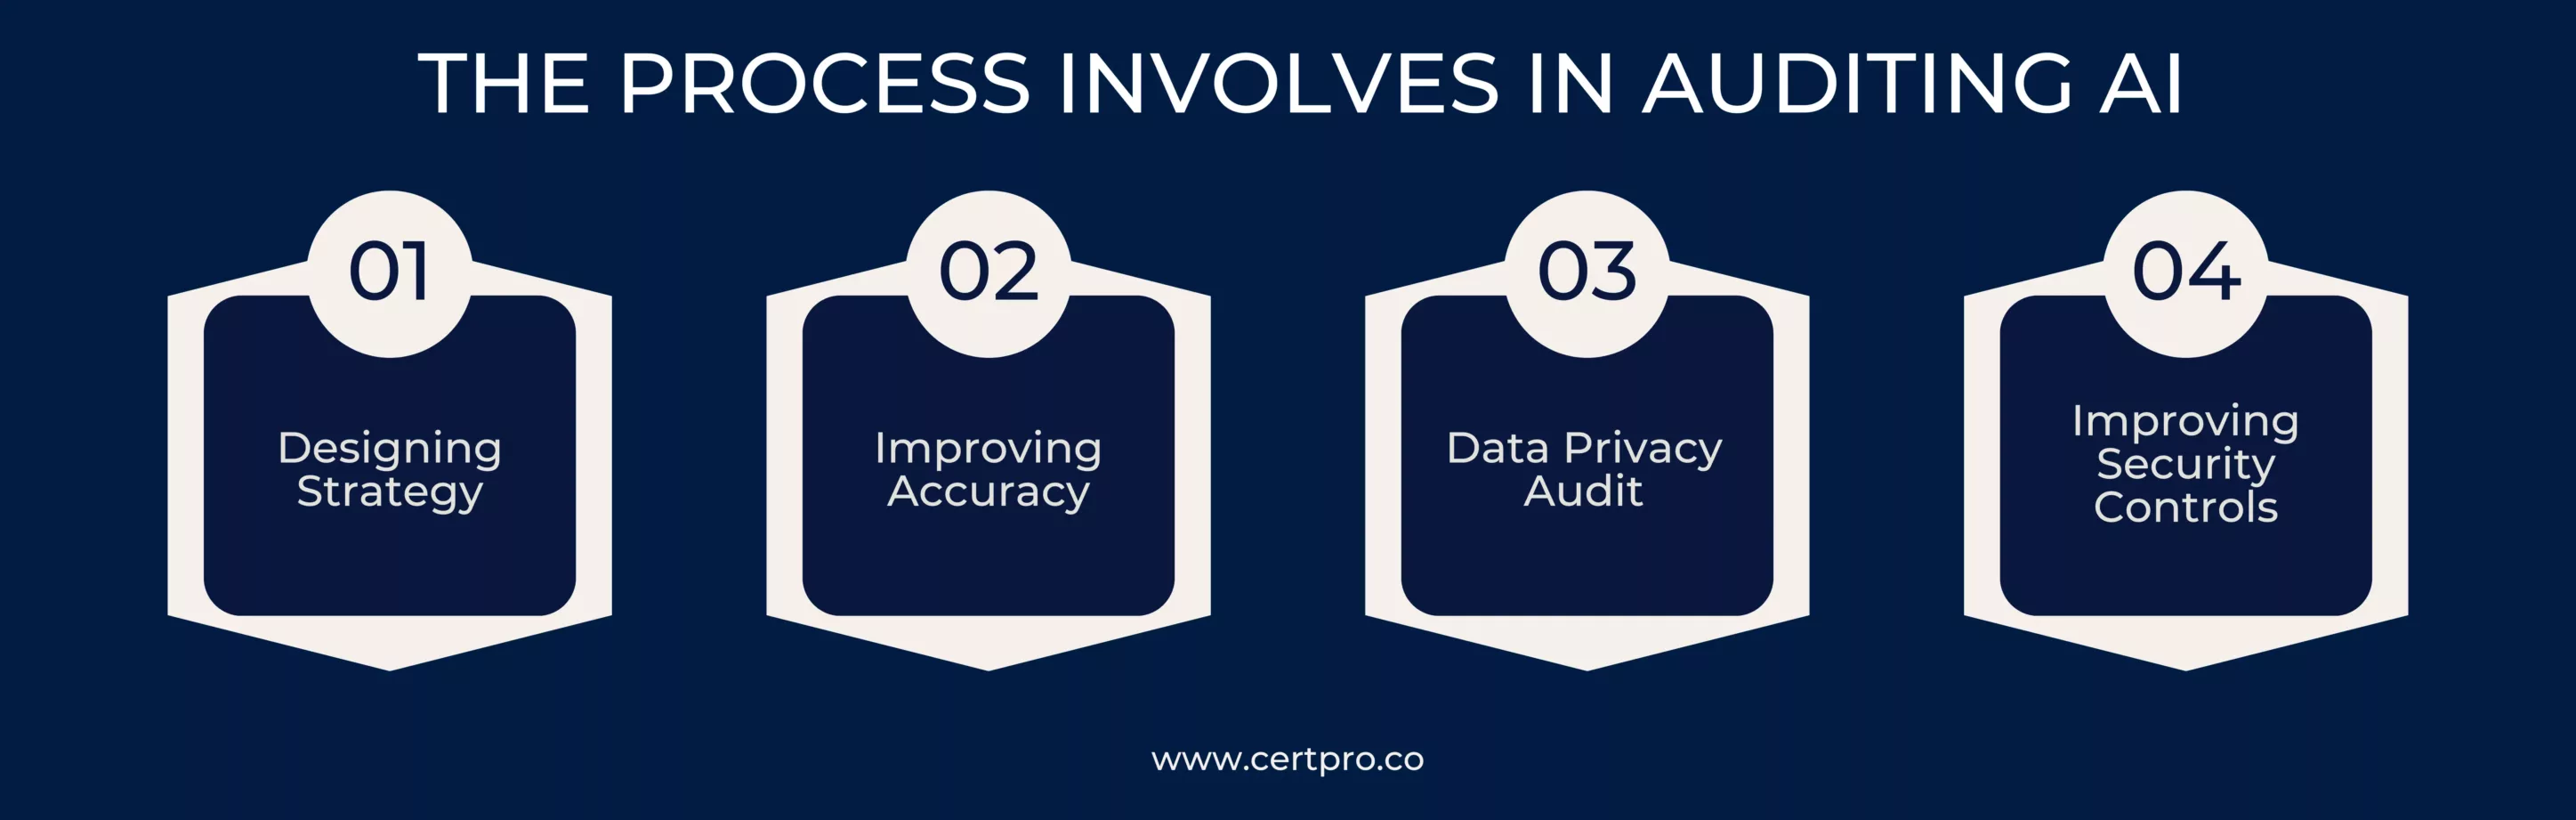 THE PROCESS INVOLVES IN AUDITING AI